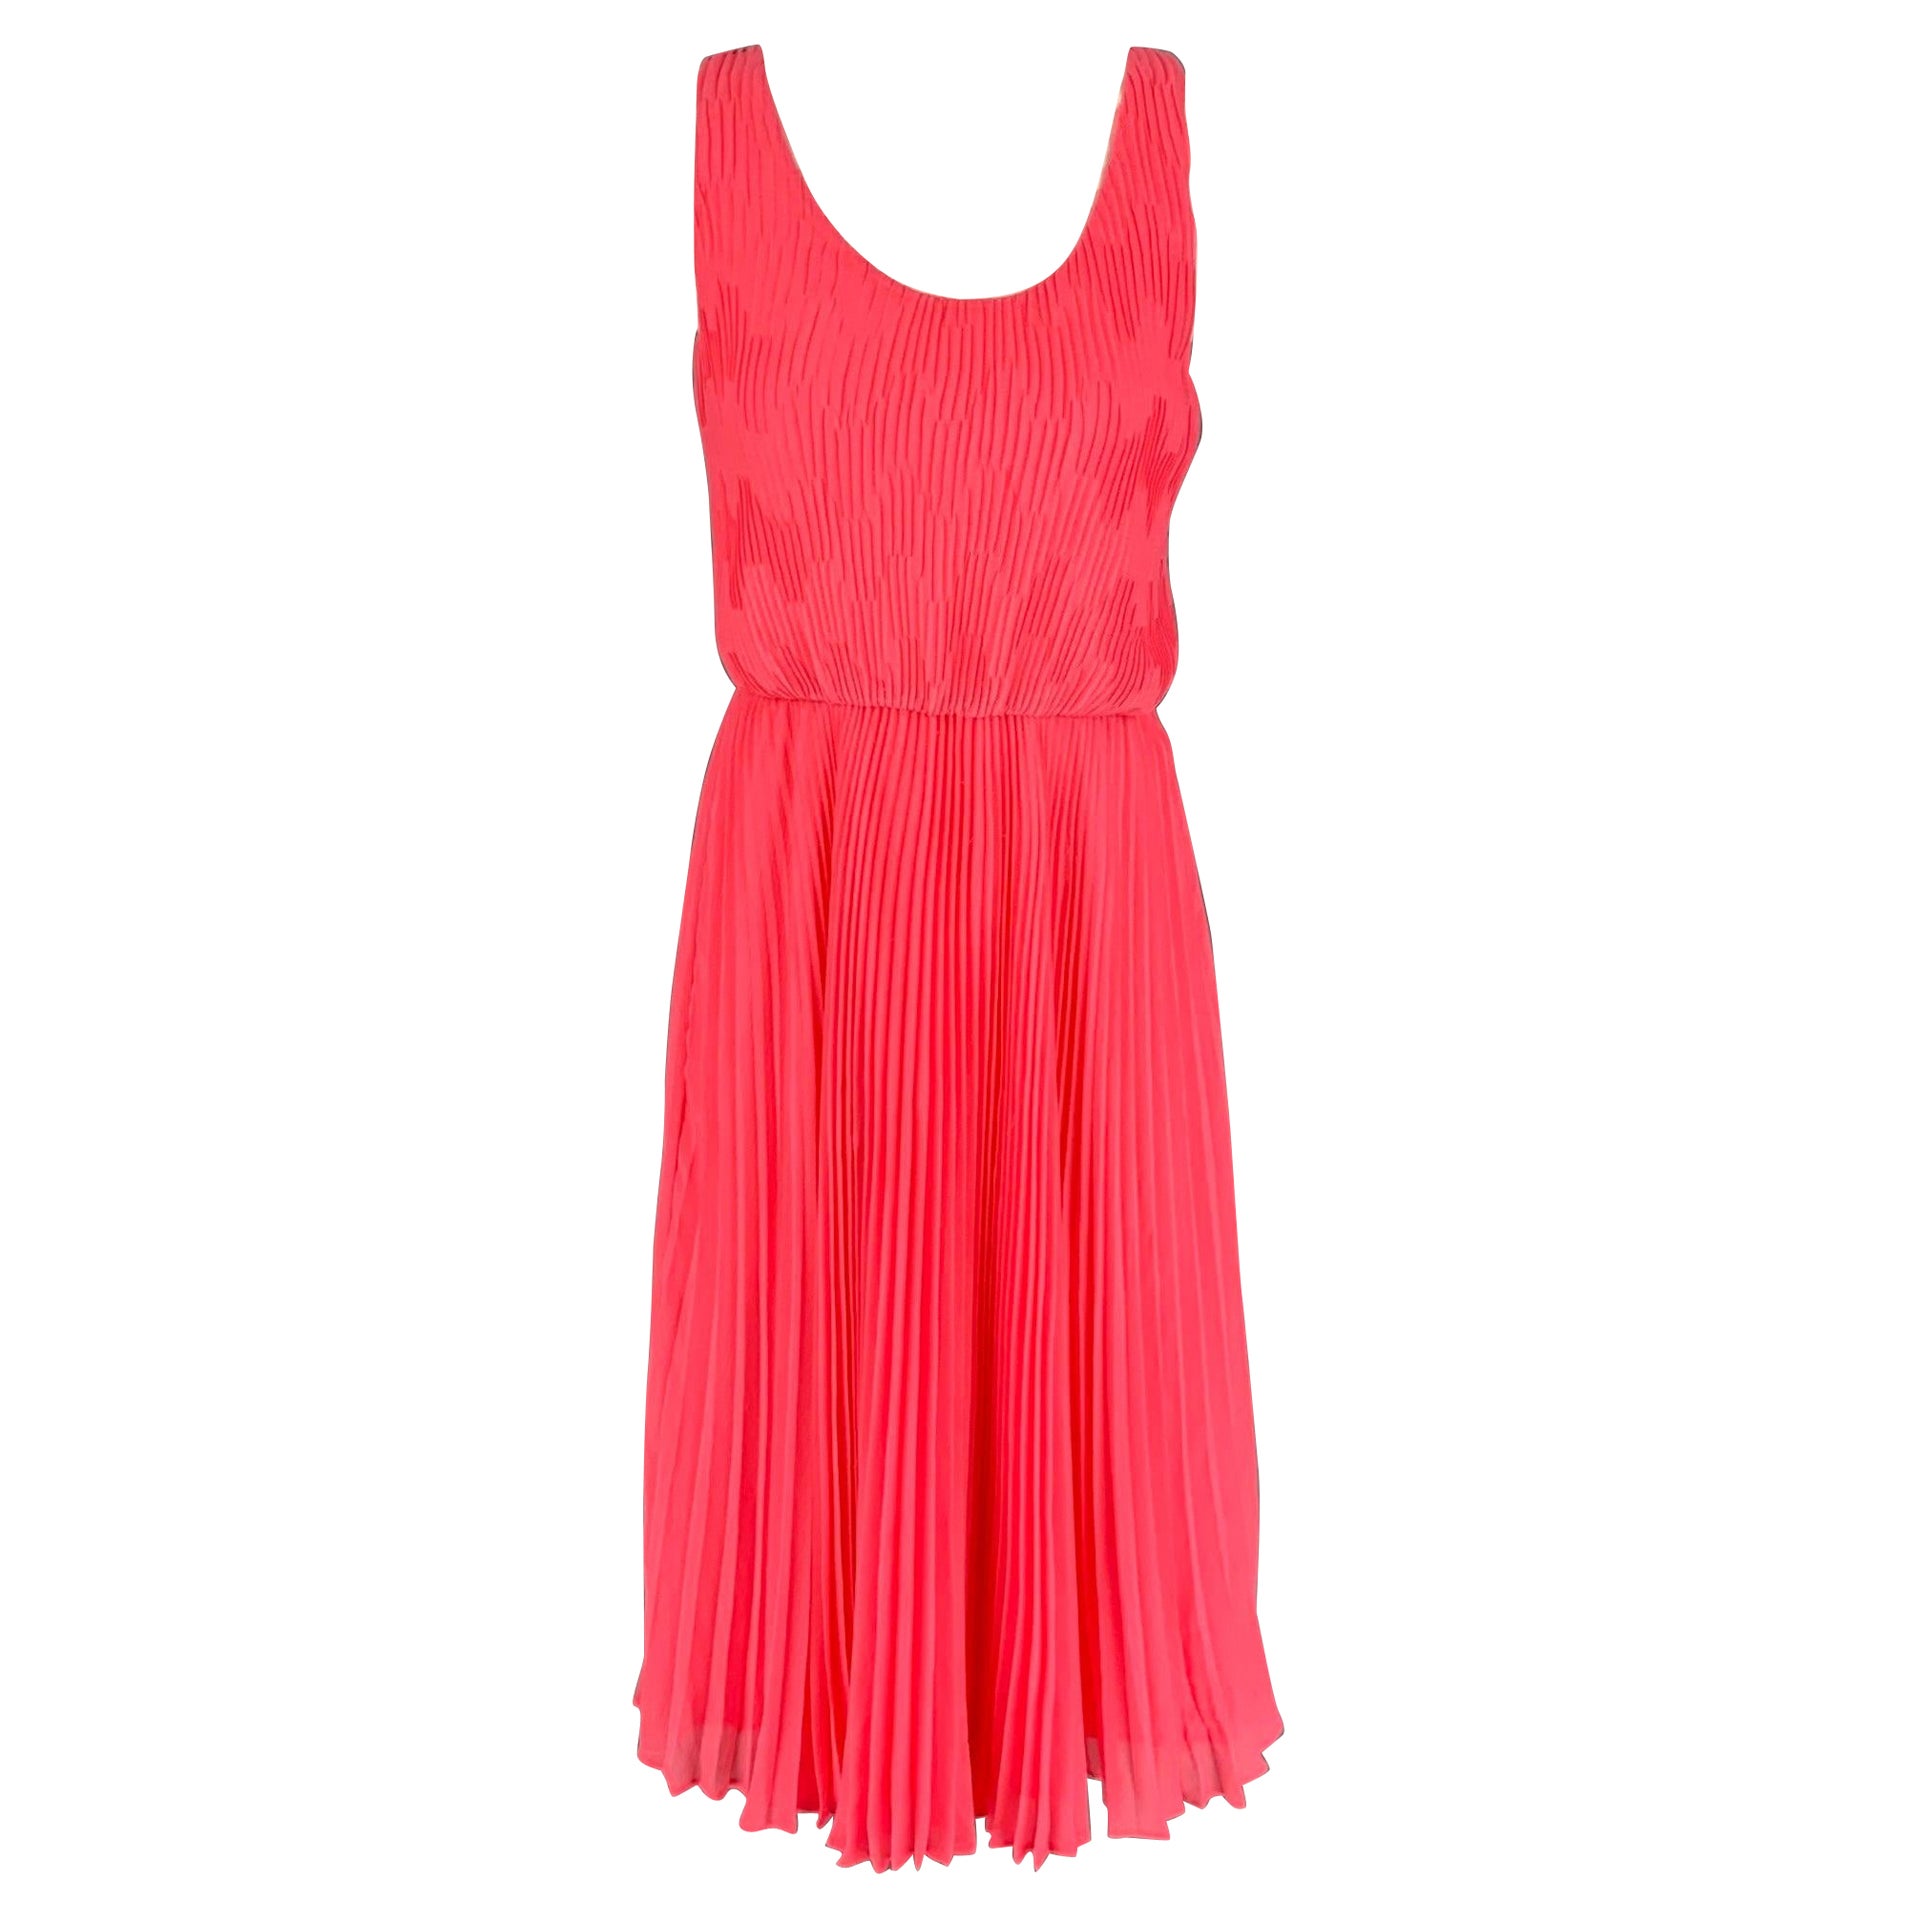 ALICE + OLIVIA Size 6 Pink Polyester Lurex Pleated Dress